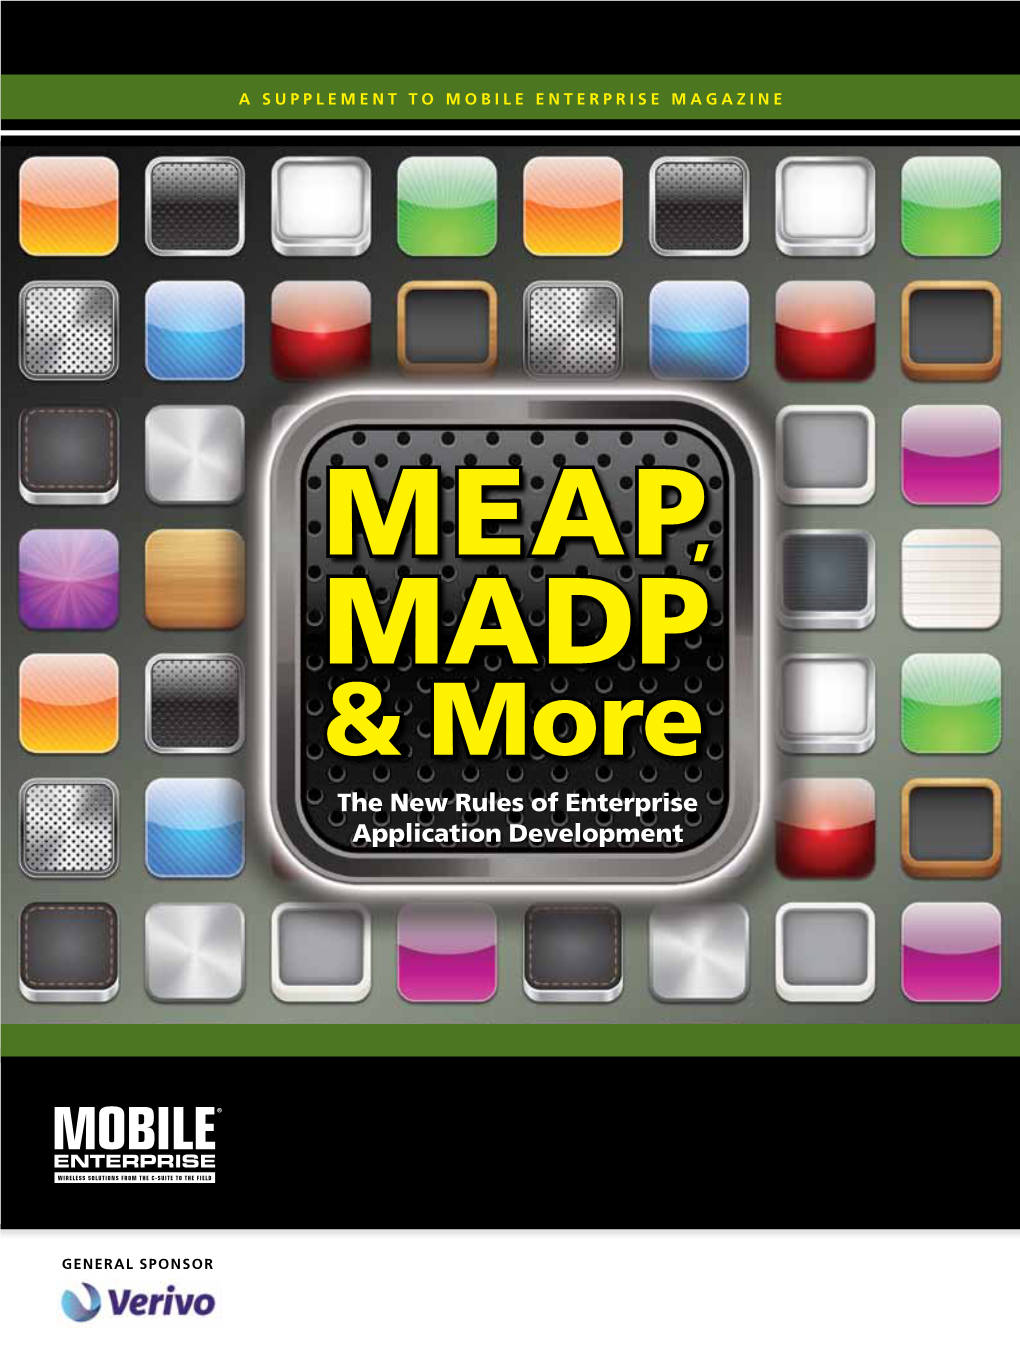 MEAP, MADP & More the New Rules of Enterprise Application Development